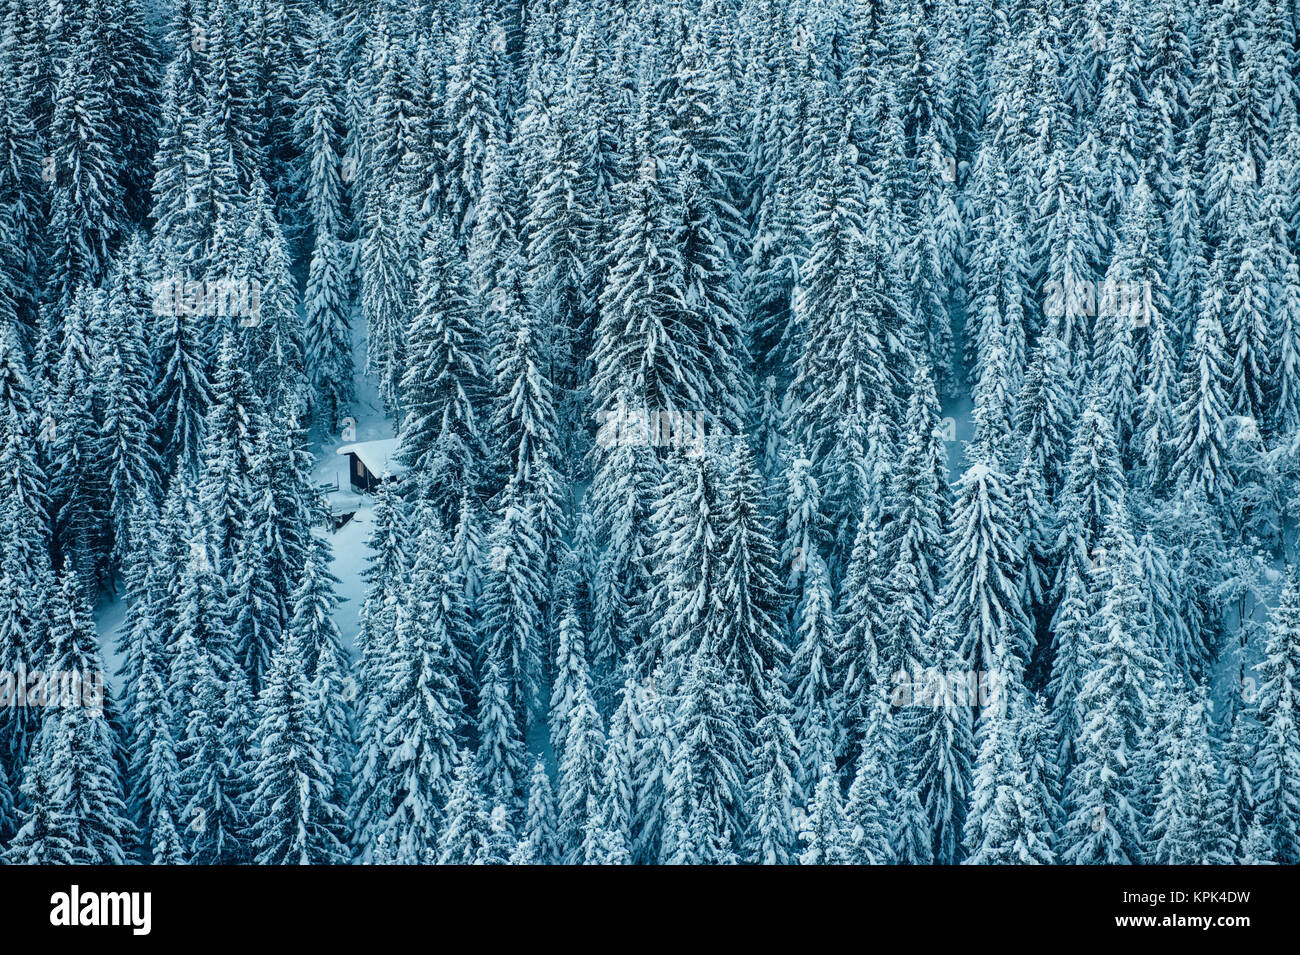 A dense coniferous forest covered in snow with a snowmobile parked in a small clearing; Laax, Switzerland Stock Photo